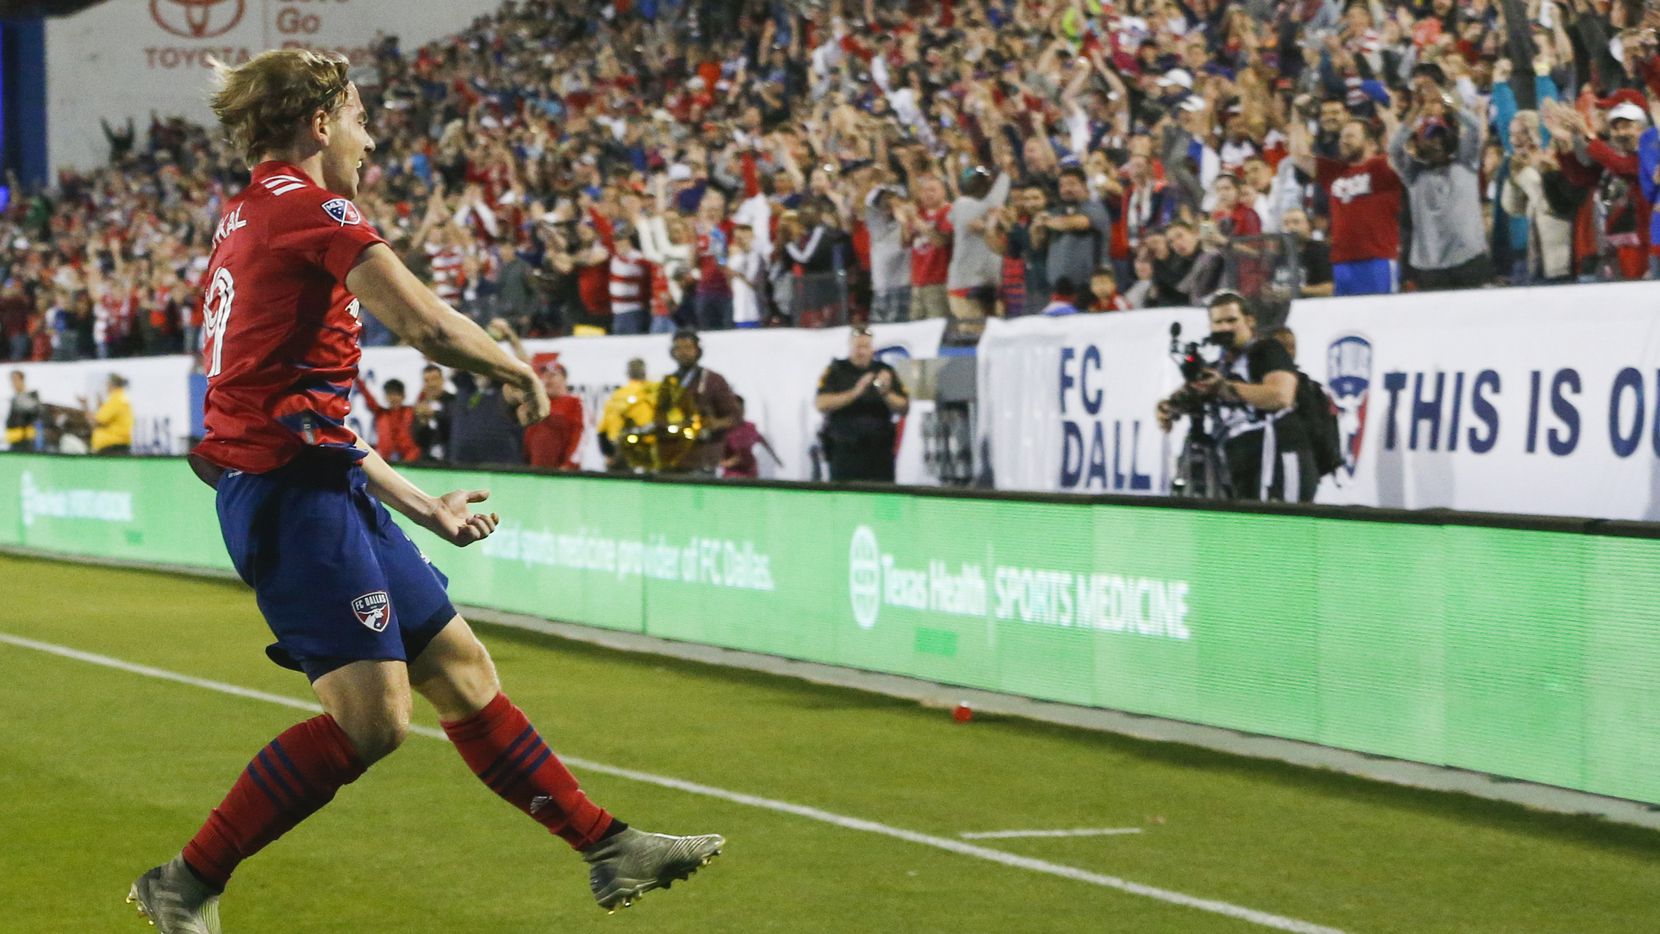 FC Dallas midfielder Paxton Pomykal (19) celebrates a goal during the second half of an MLS soccer match between FC Dallas and Philadelphia Union on Saturday, Feb. 29, 2020 at Toyota Stadium in Frisco, Texas.